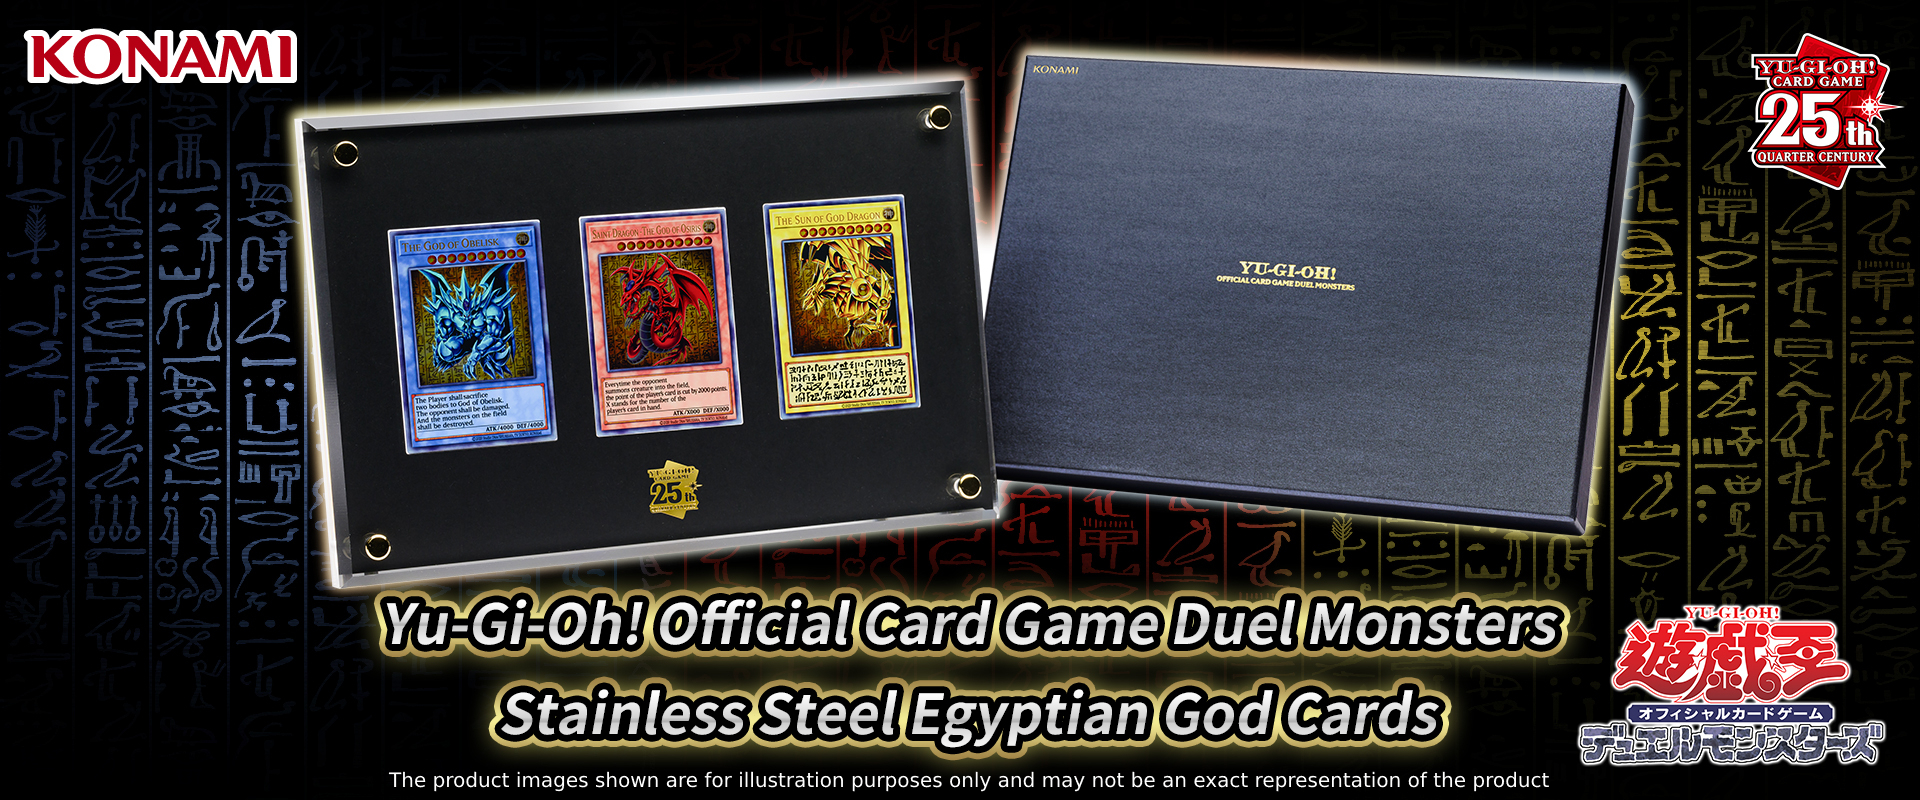 Yu-Gi-Oh! Duel Monsters Stainless Stell Egyptian God Cards